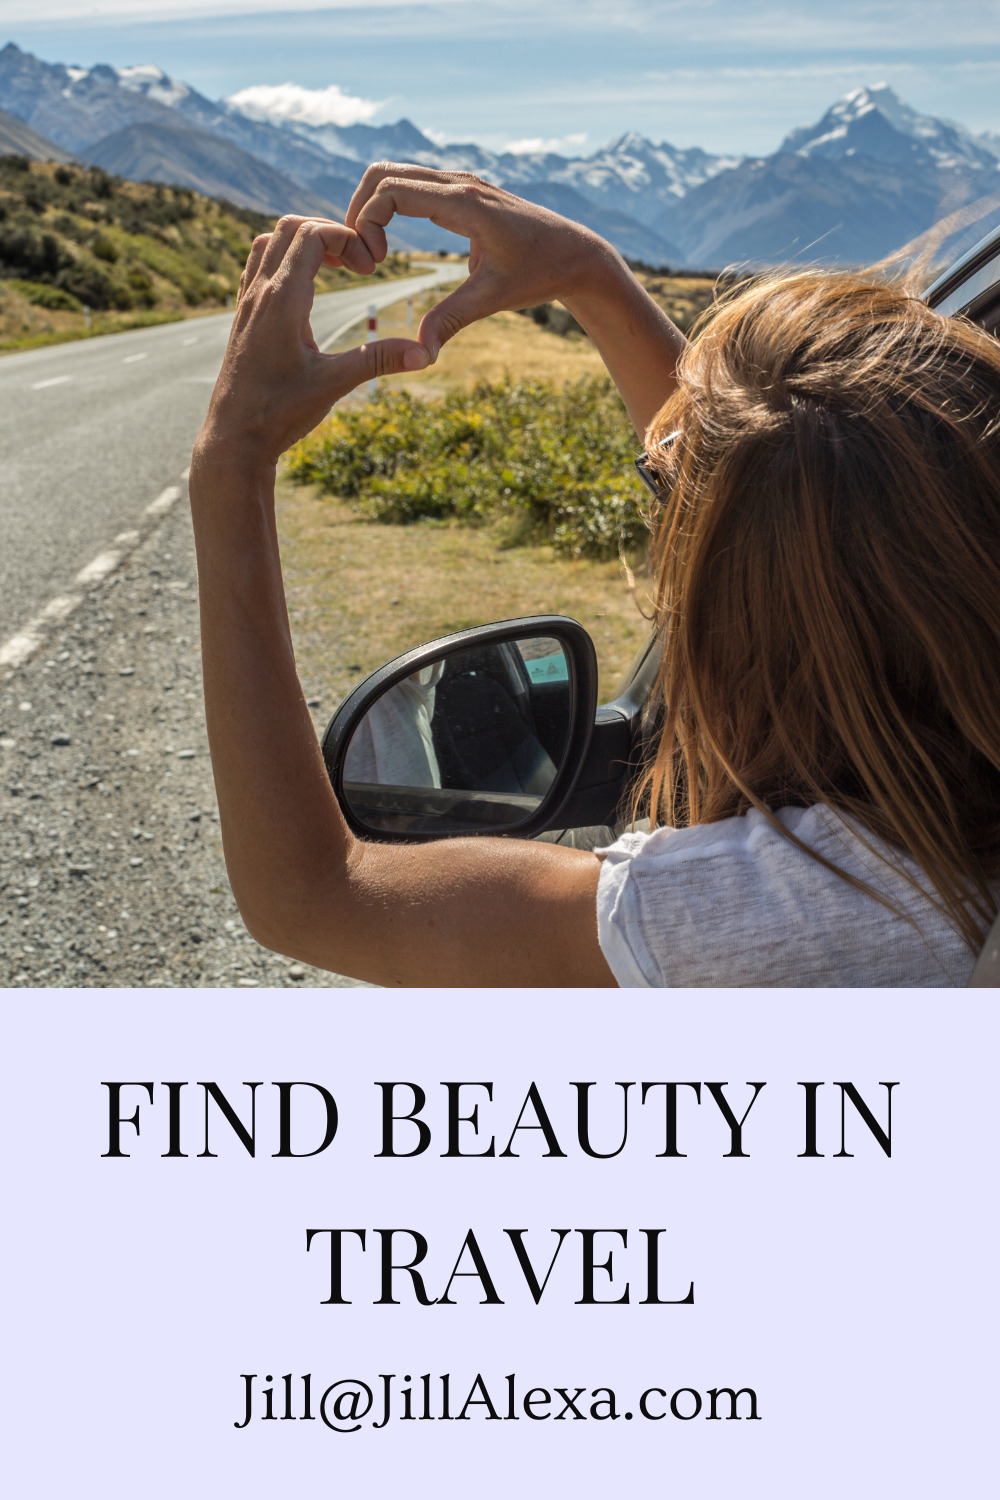 Keep a photographic record as you Find the Beauty in Travel. 